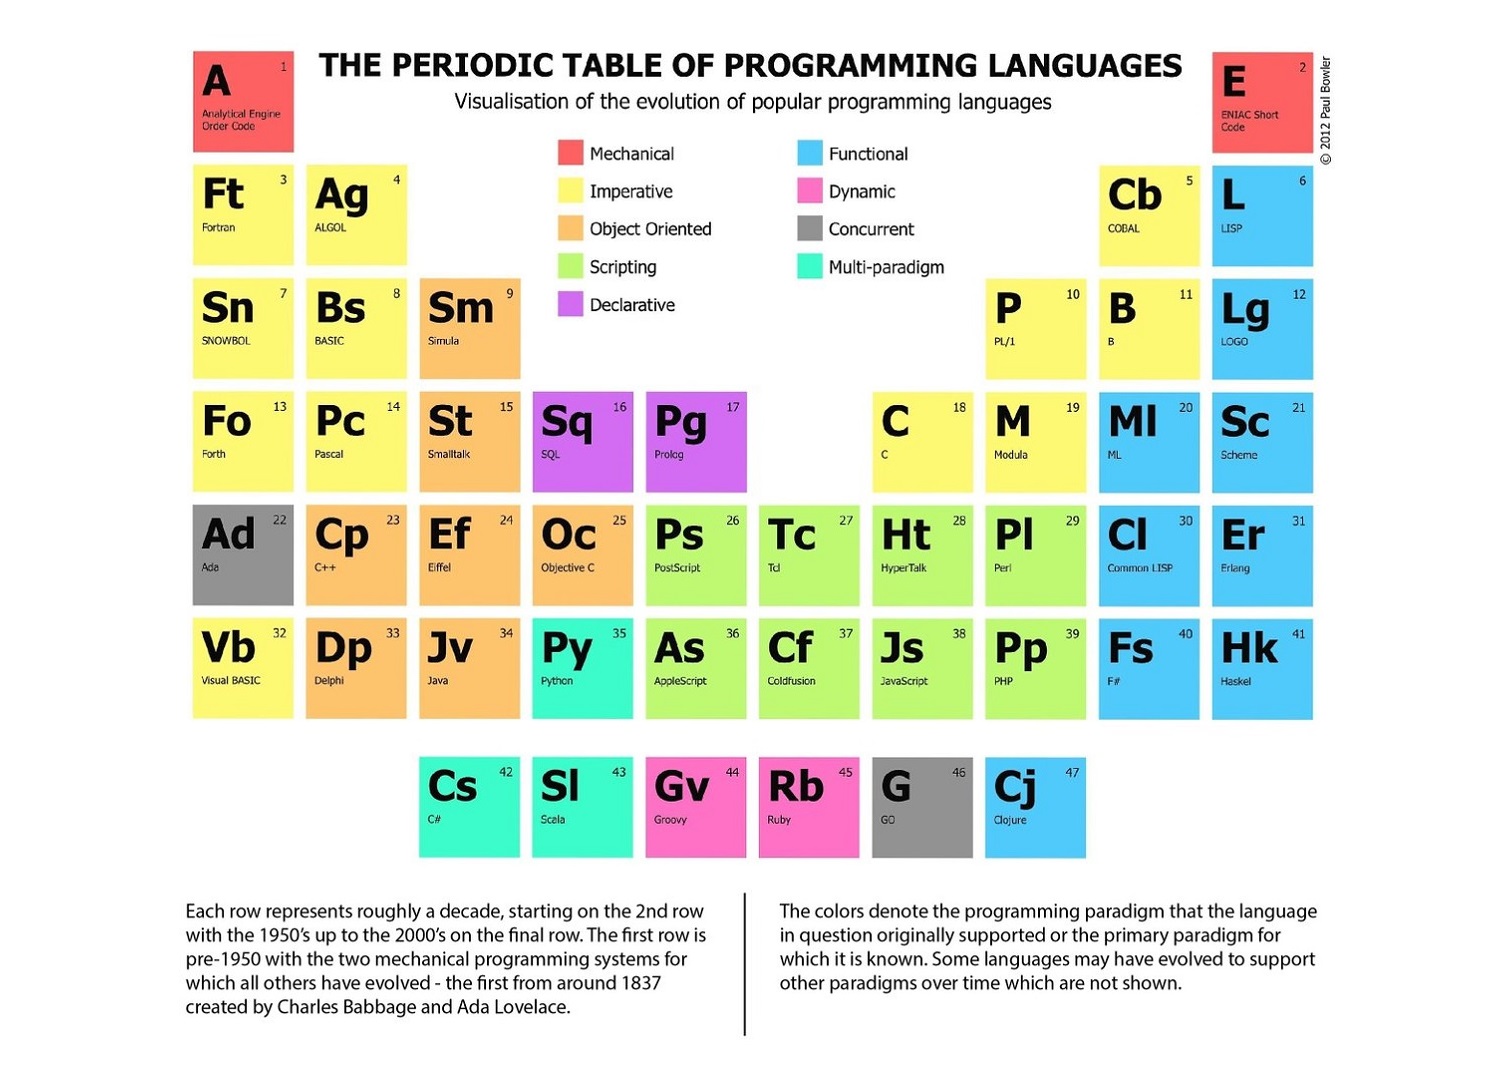 The Periodic Table of Programming Languages